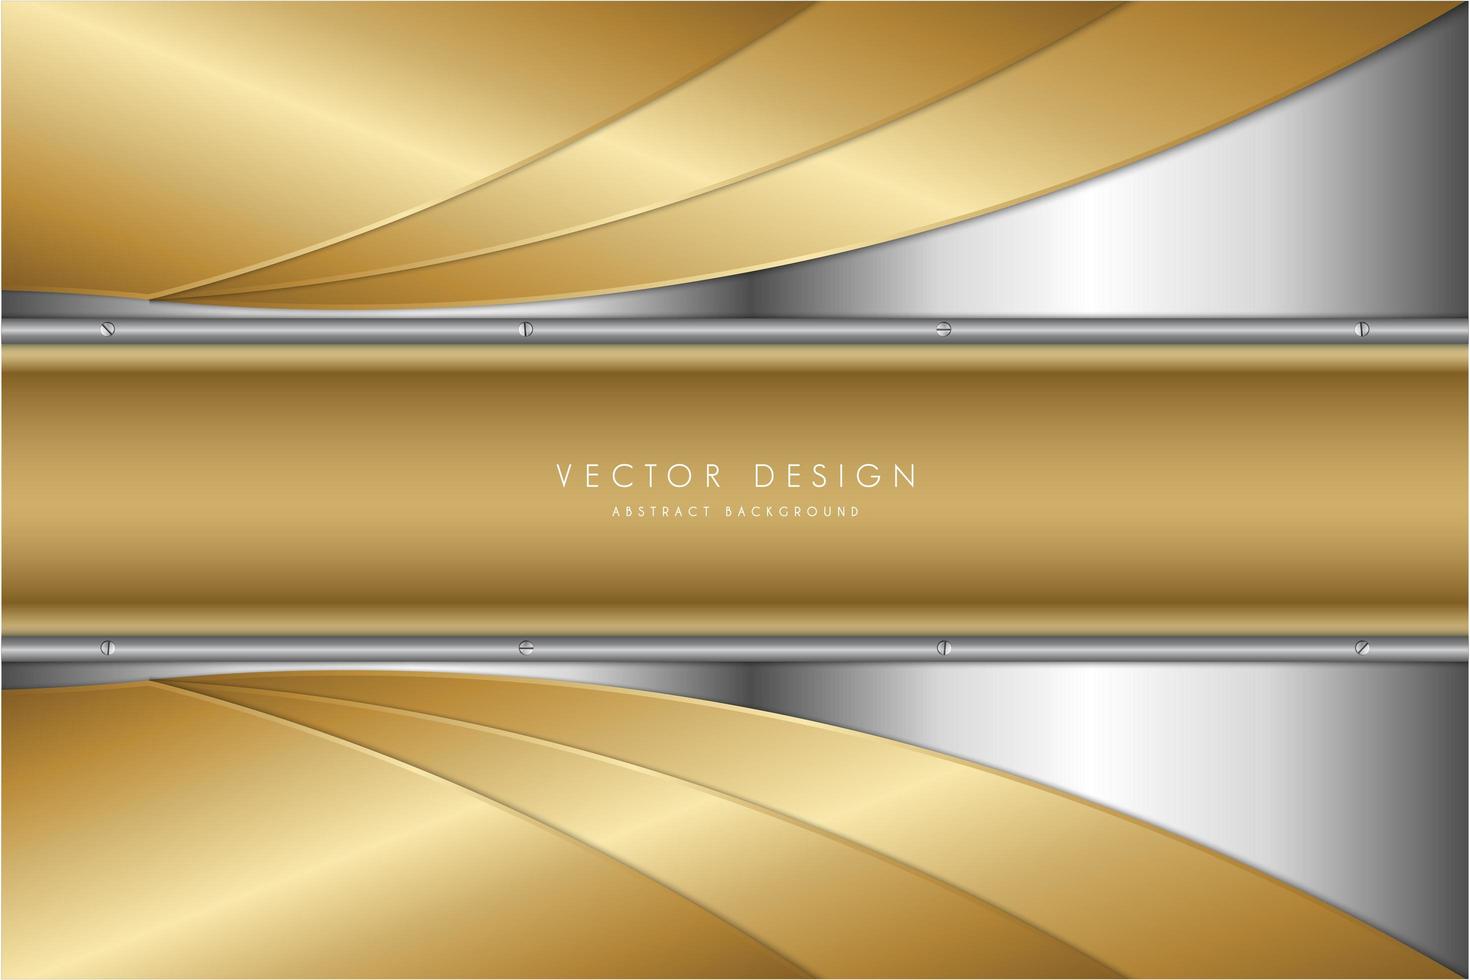 Modern gold and silver metallic background vector